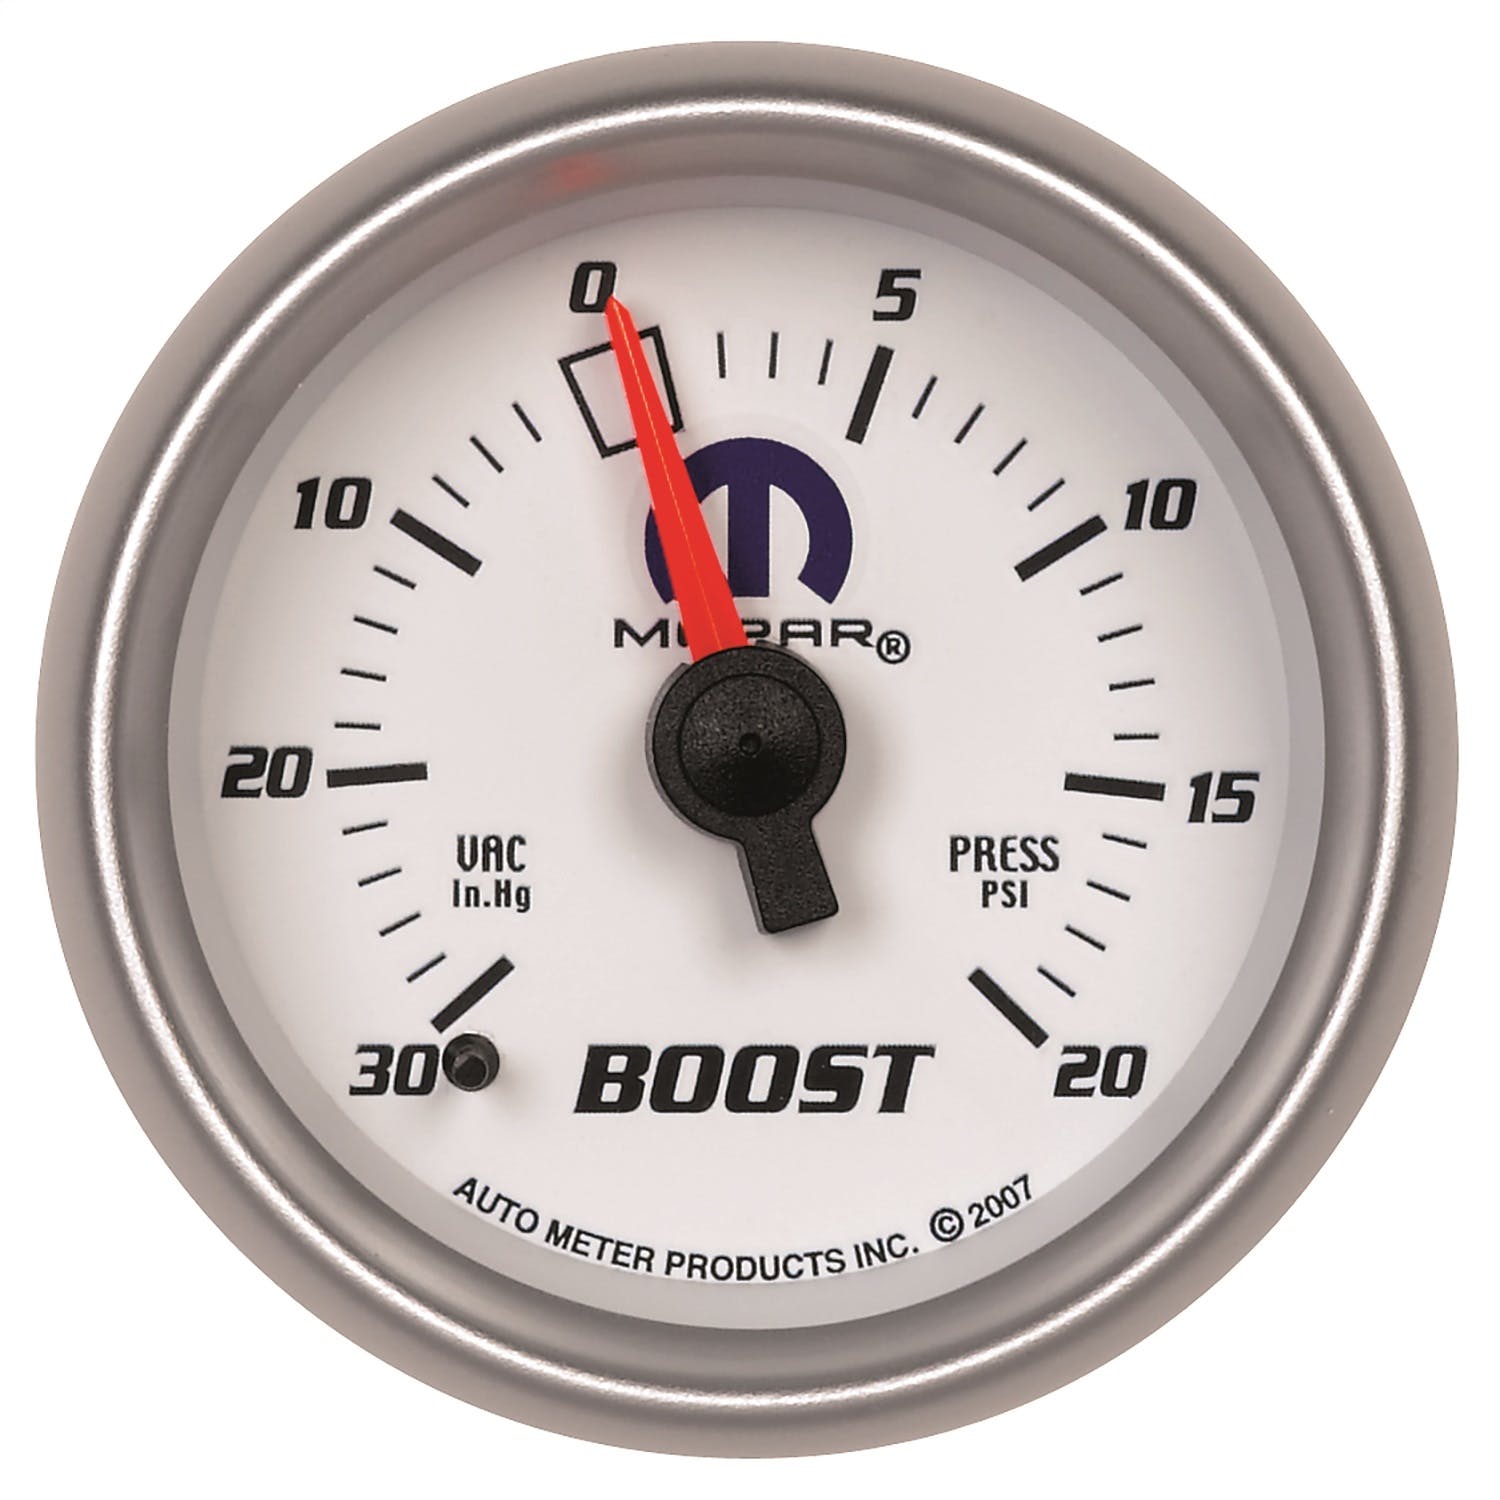 AutoMeter Products 880026 Mopar Mechanical Boost/Vacuum Gauge 2 1/16in. 30in. Hg./20 psi Includes 6ft.